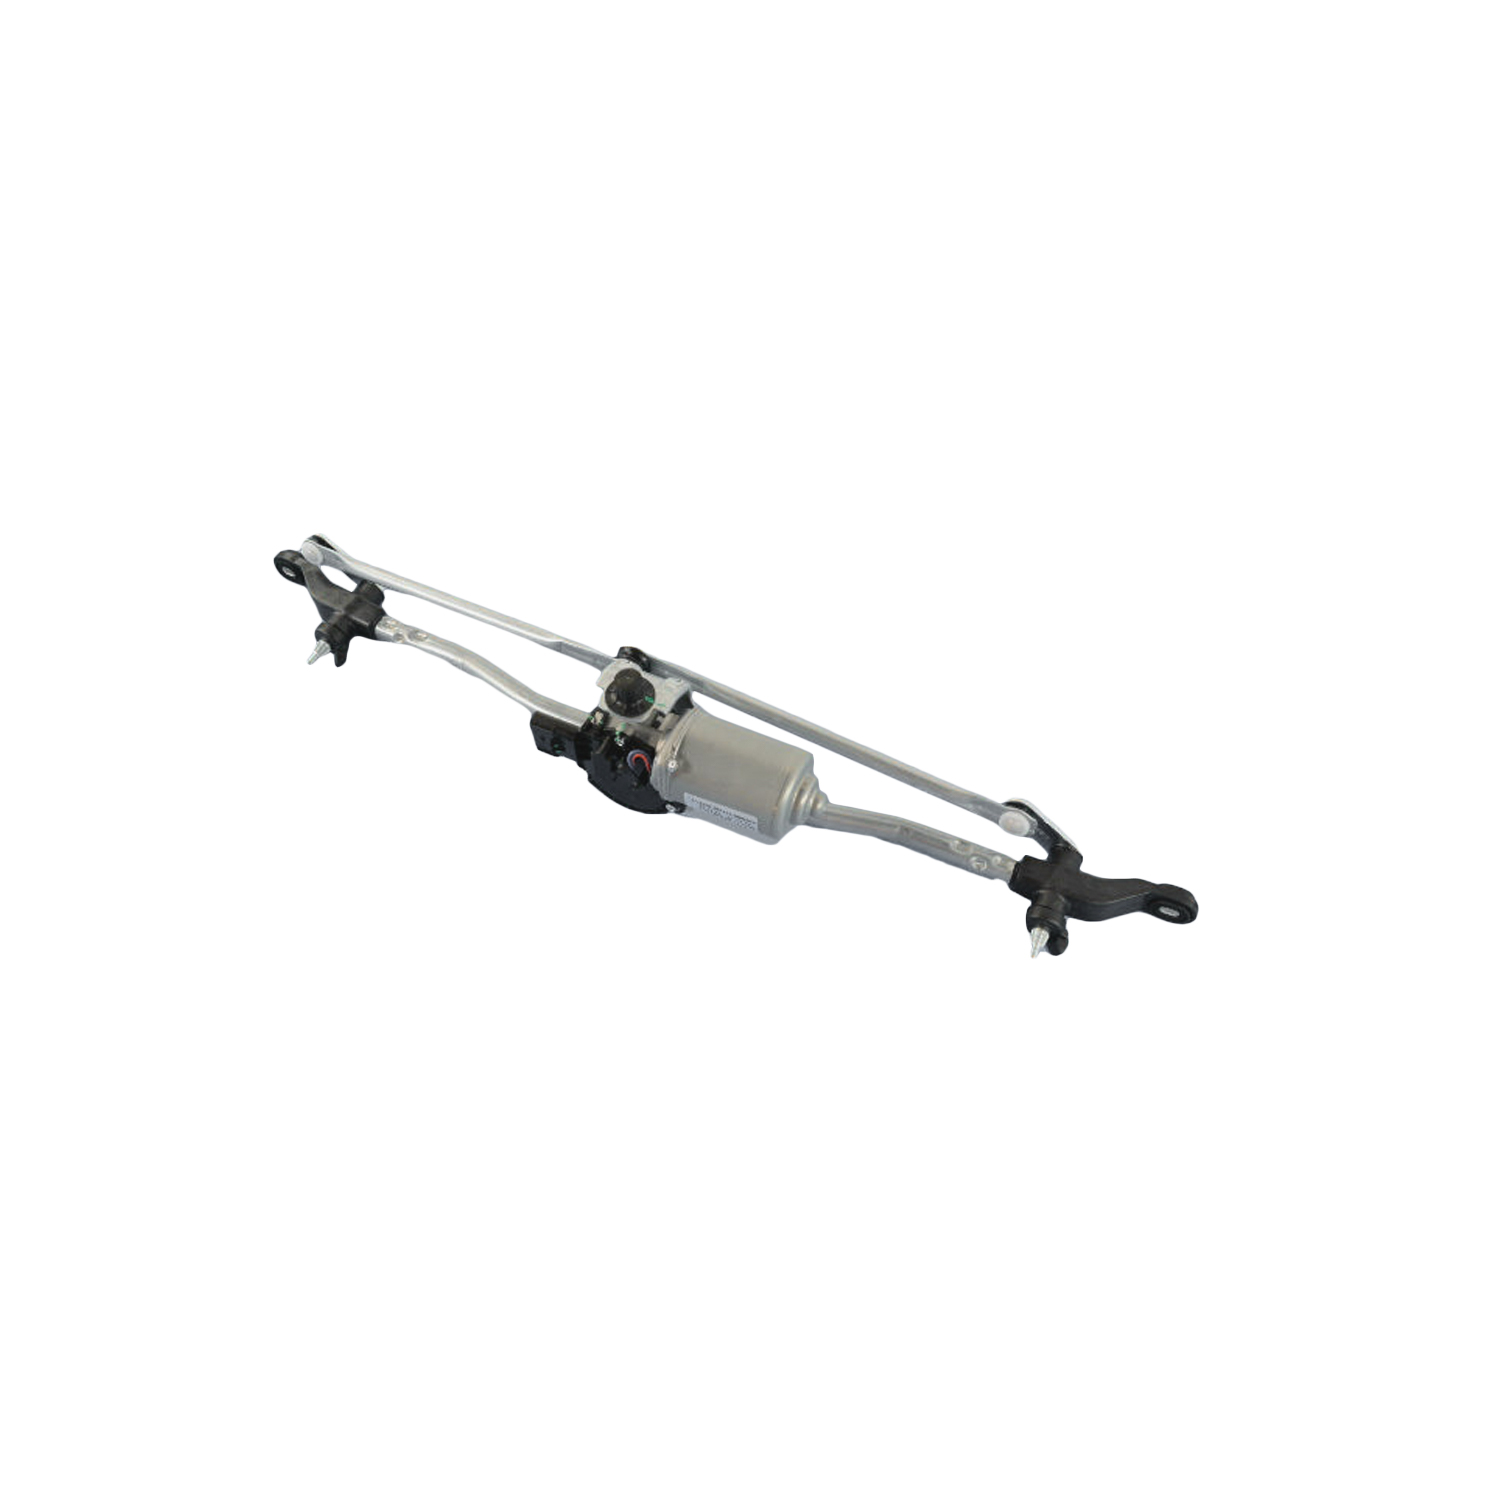 MOPAR BRAND - Windshield Wiper Arm, Linkage And Motor Assembly - MPB 55077859AD